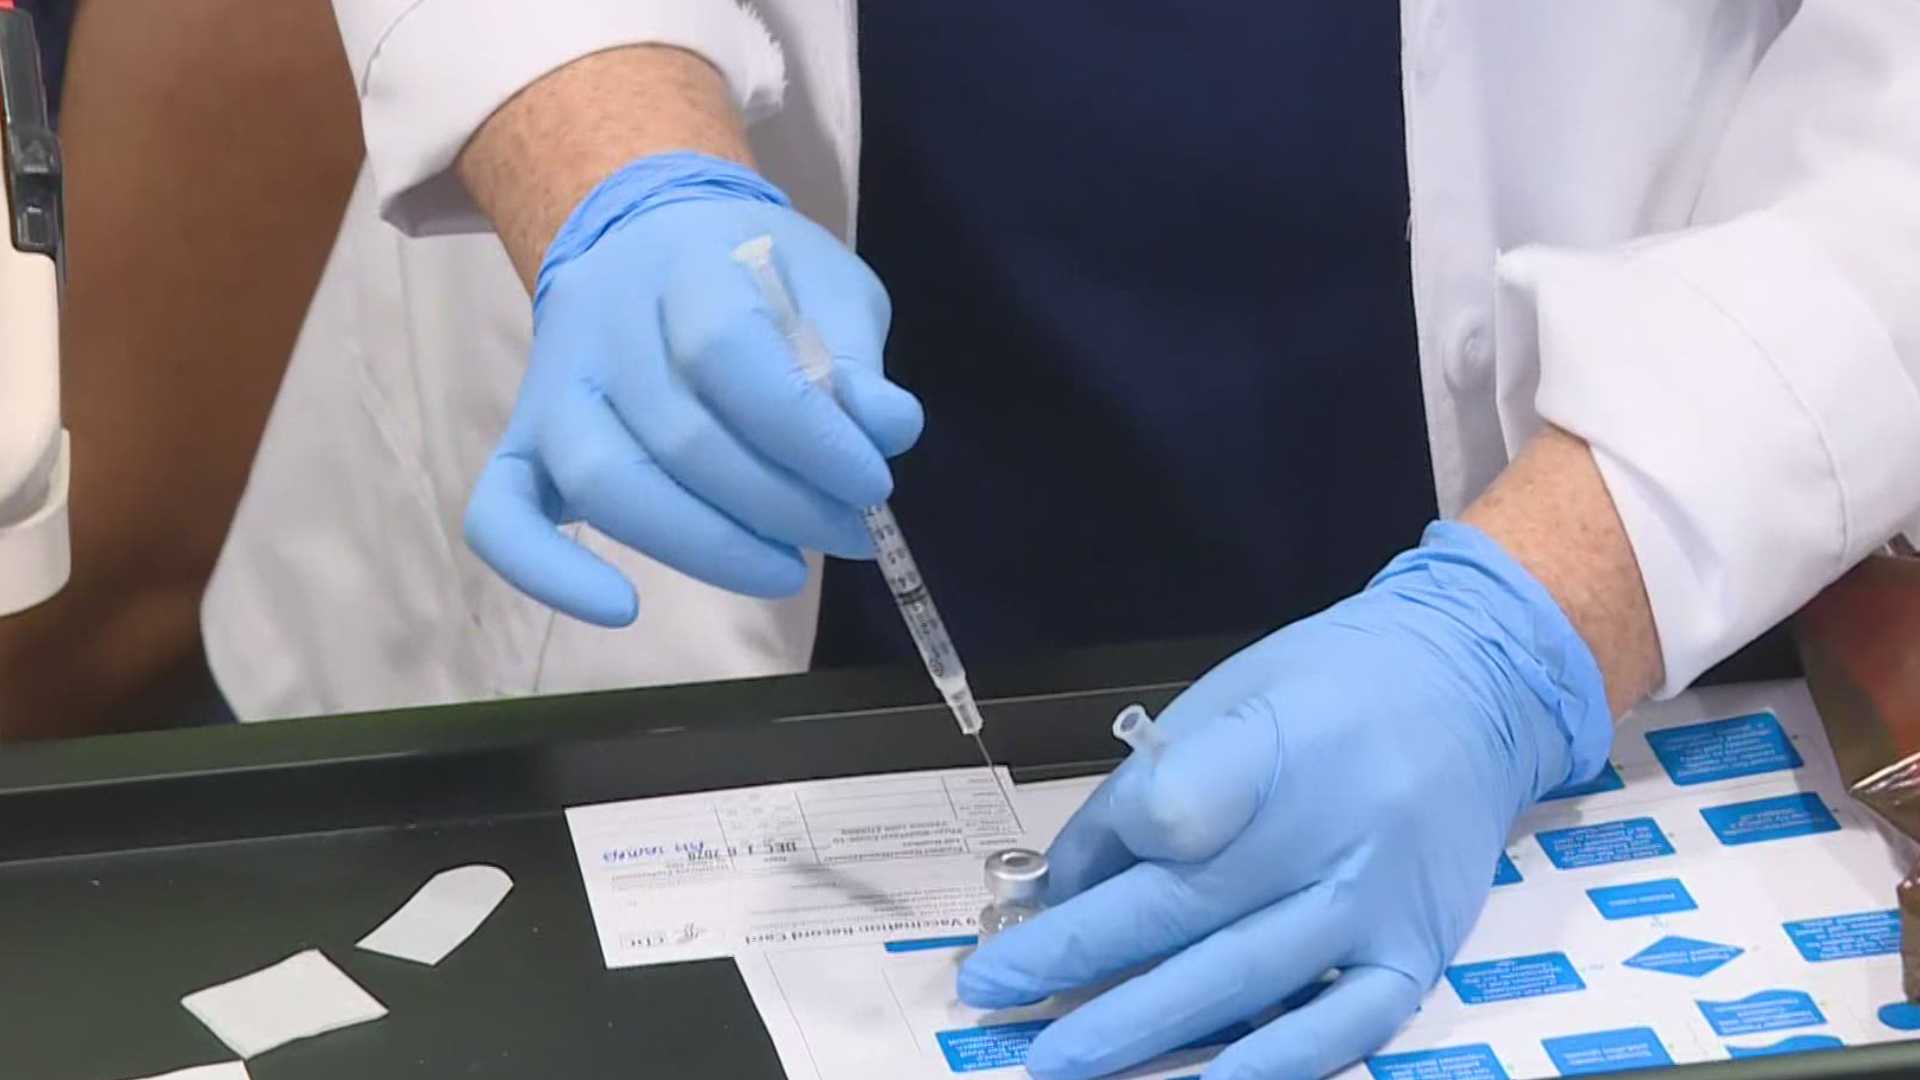 You may have heard the virus isn't safe and the side effects are horrible, but doctors say the benefits of the vaccine outweigh the risk of the virus.